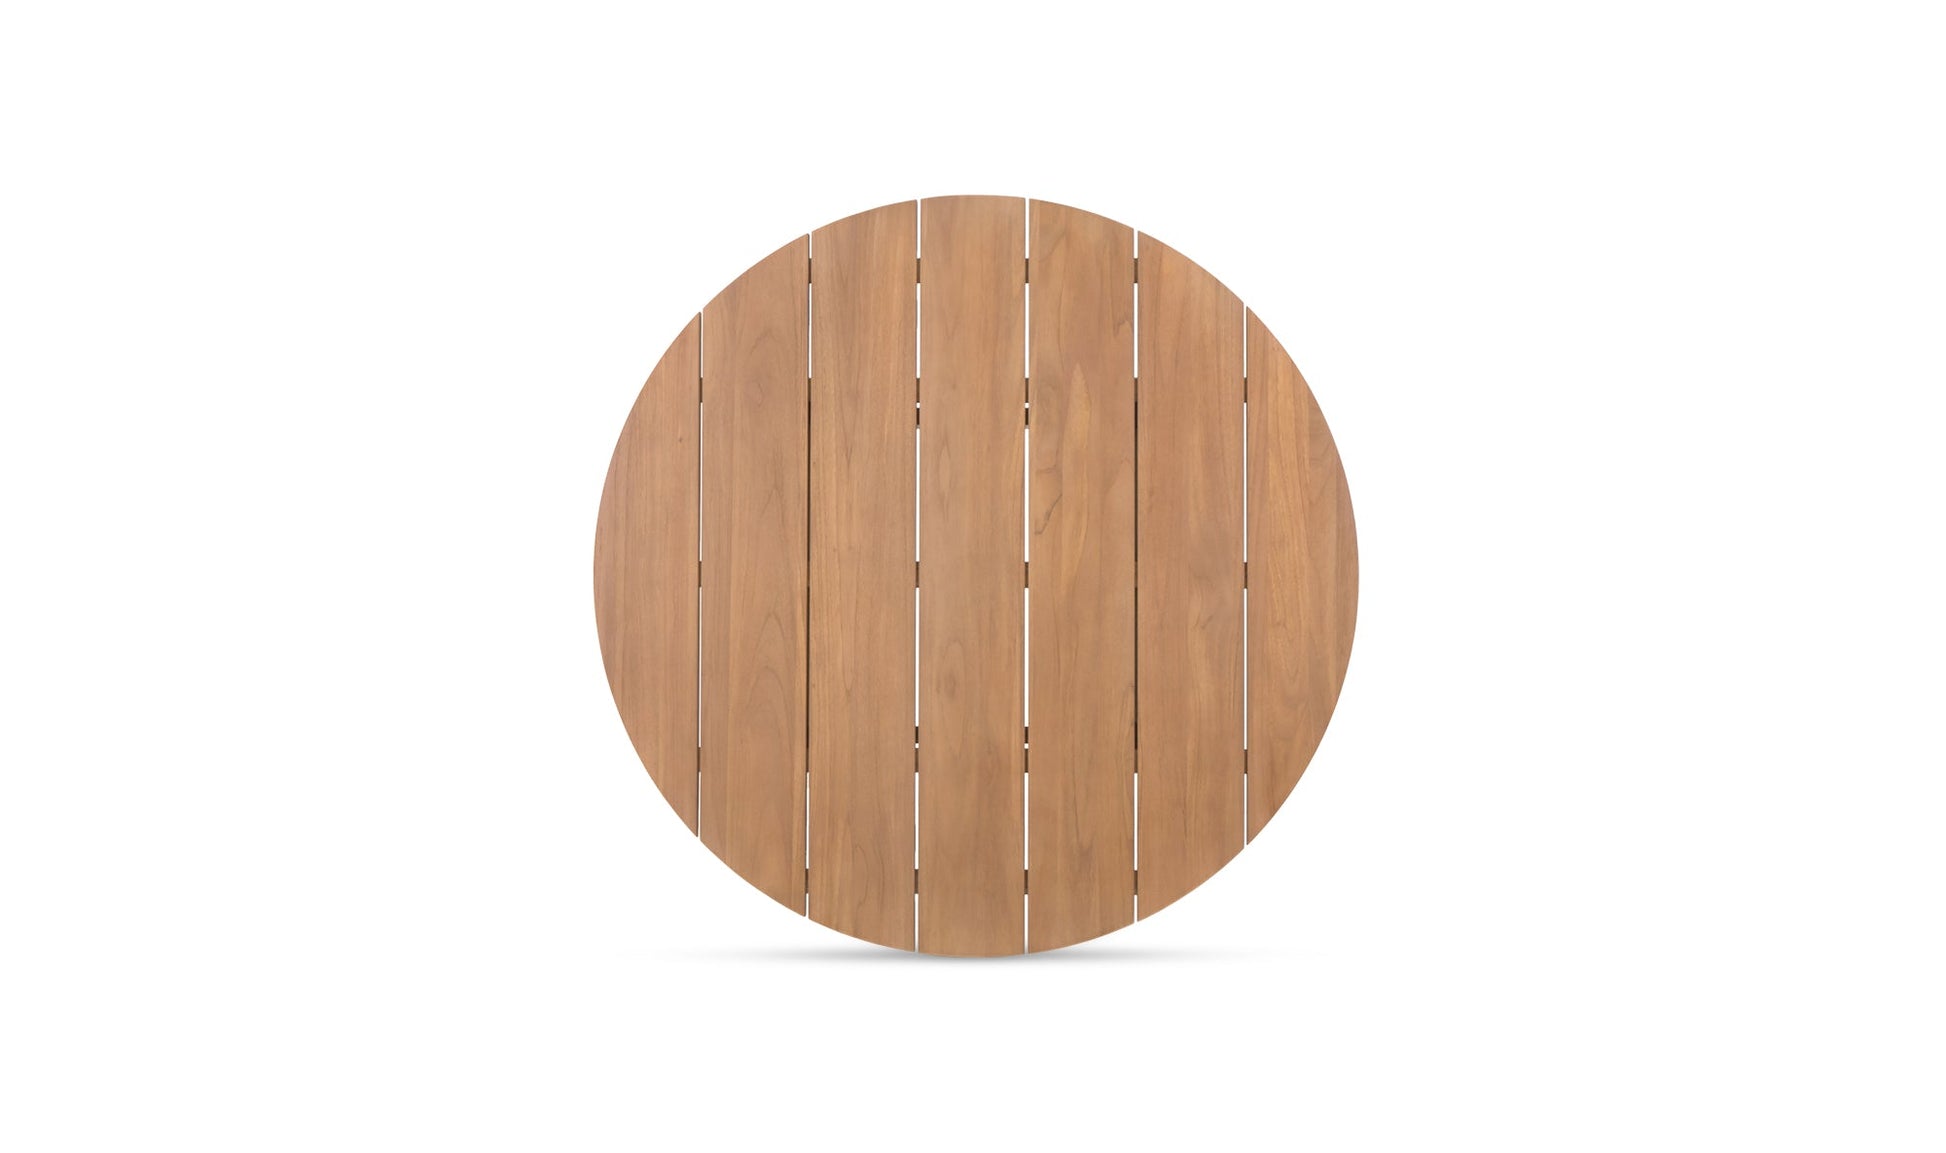 Moe's DELTA OUTDOOR DINING TABLE ROUND